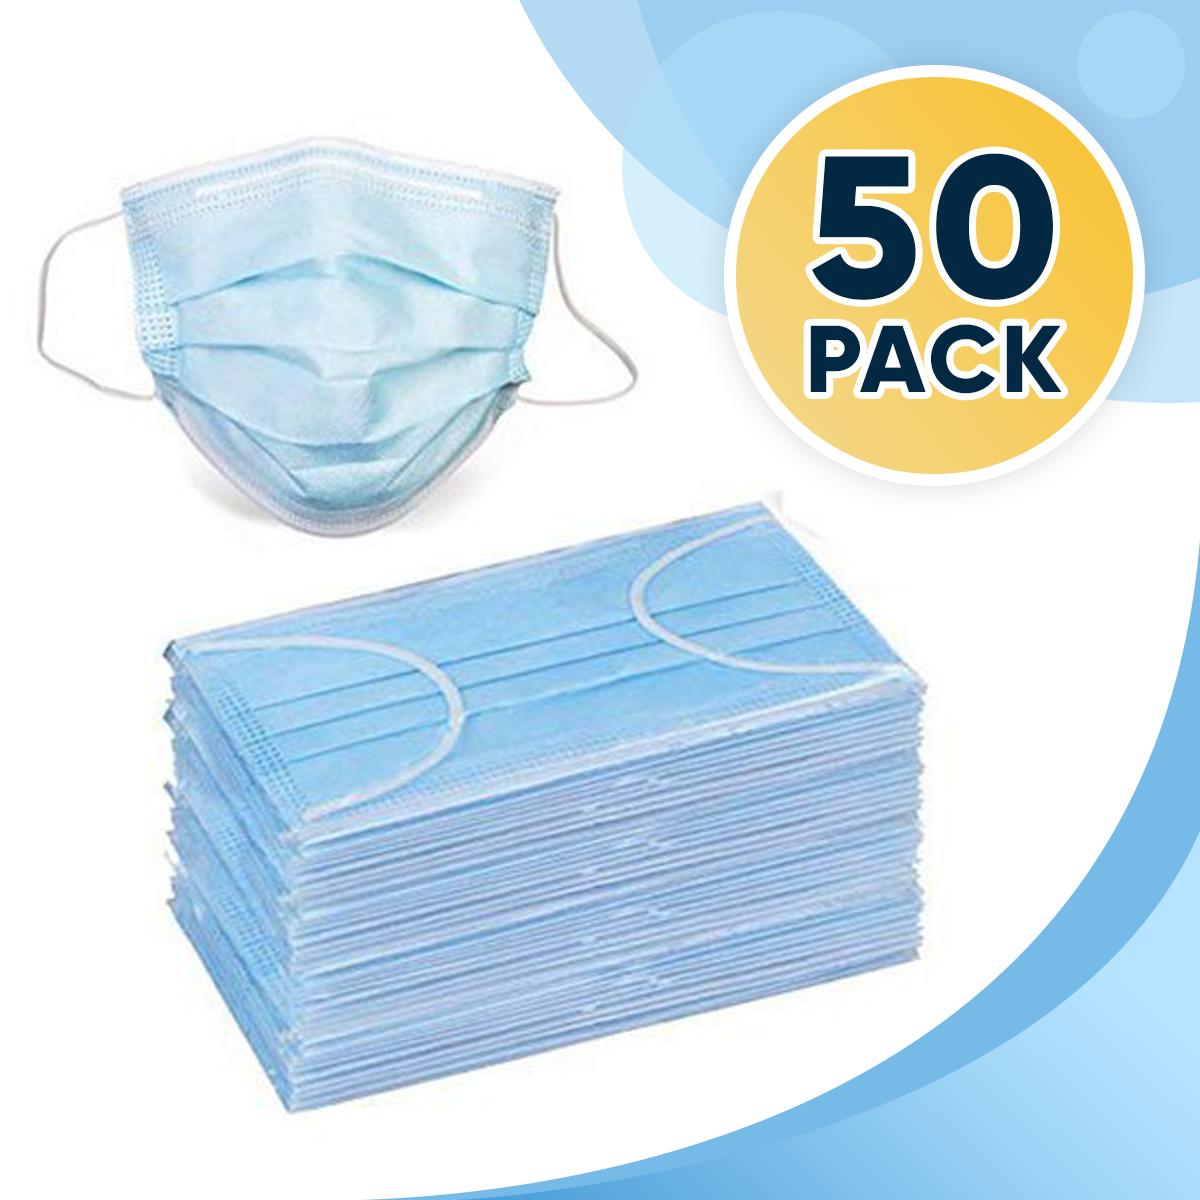 50 Disposable Face Masks, 3-ply Breathable Dust Protection Masks, Elastic Ear Loop Filter Mask - image 1 of 3